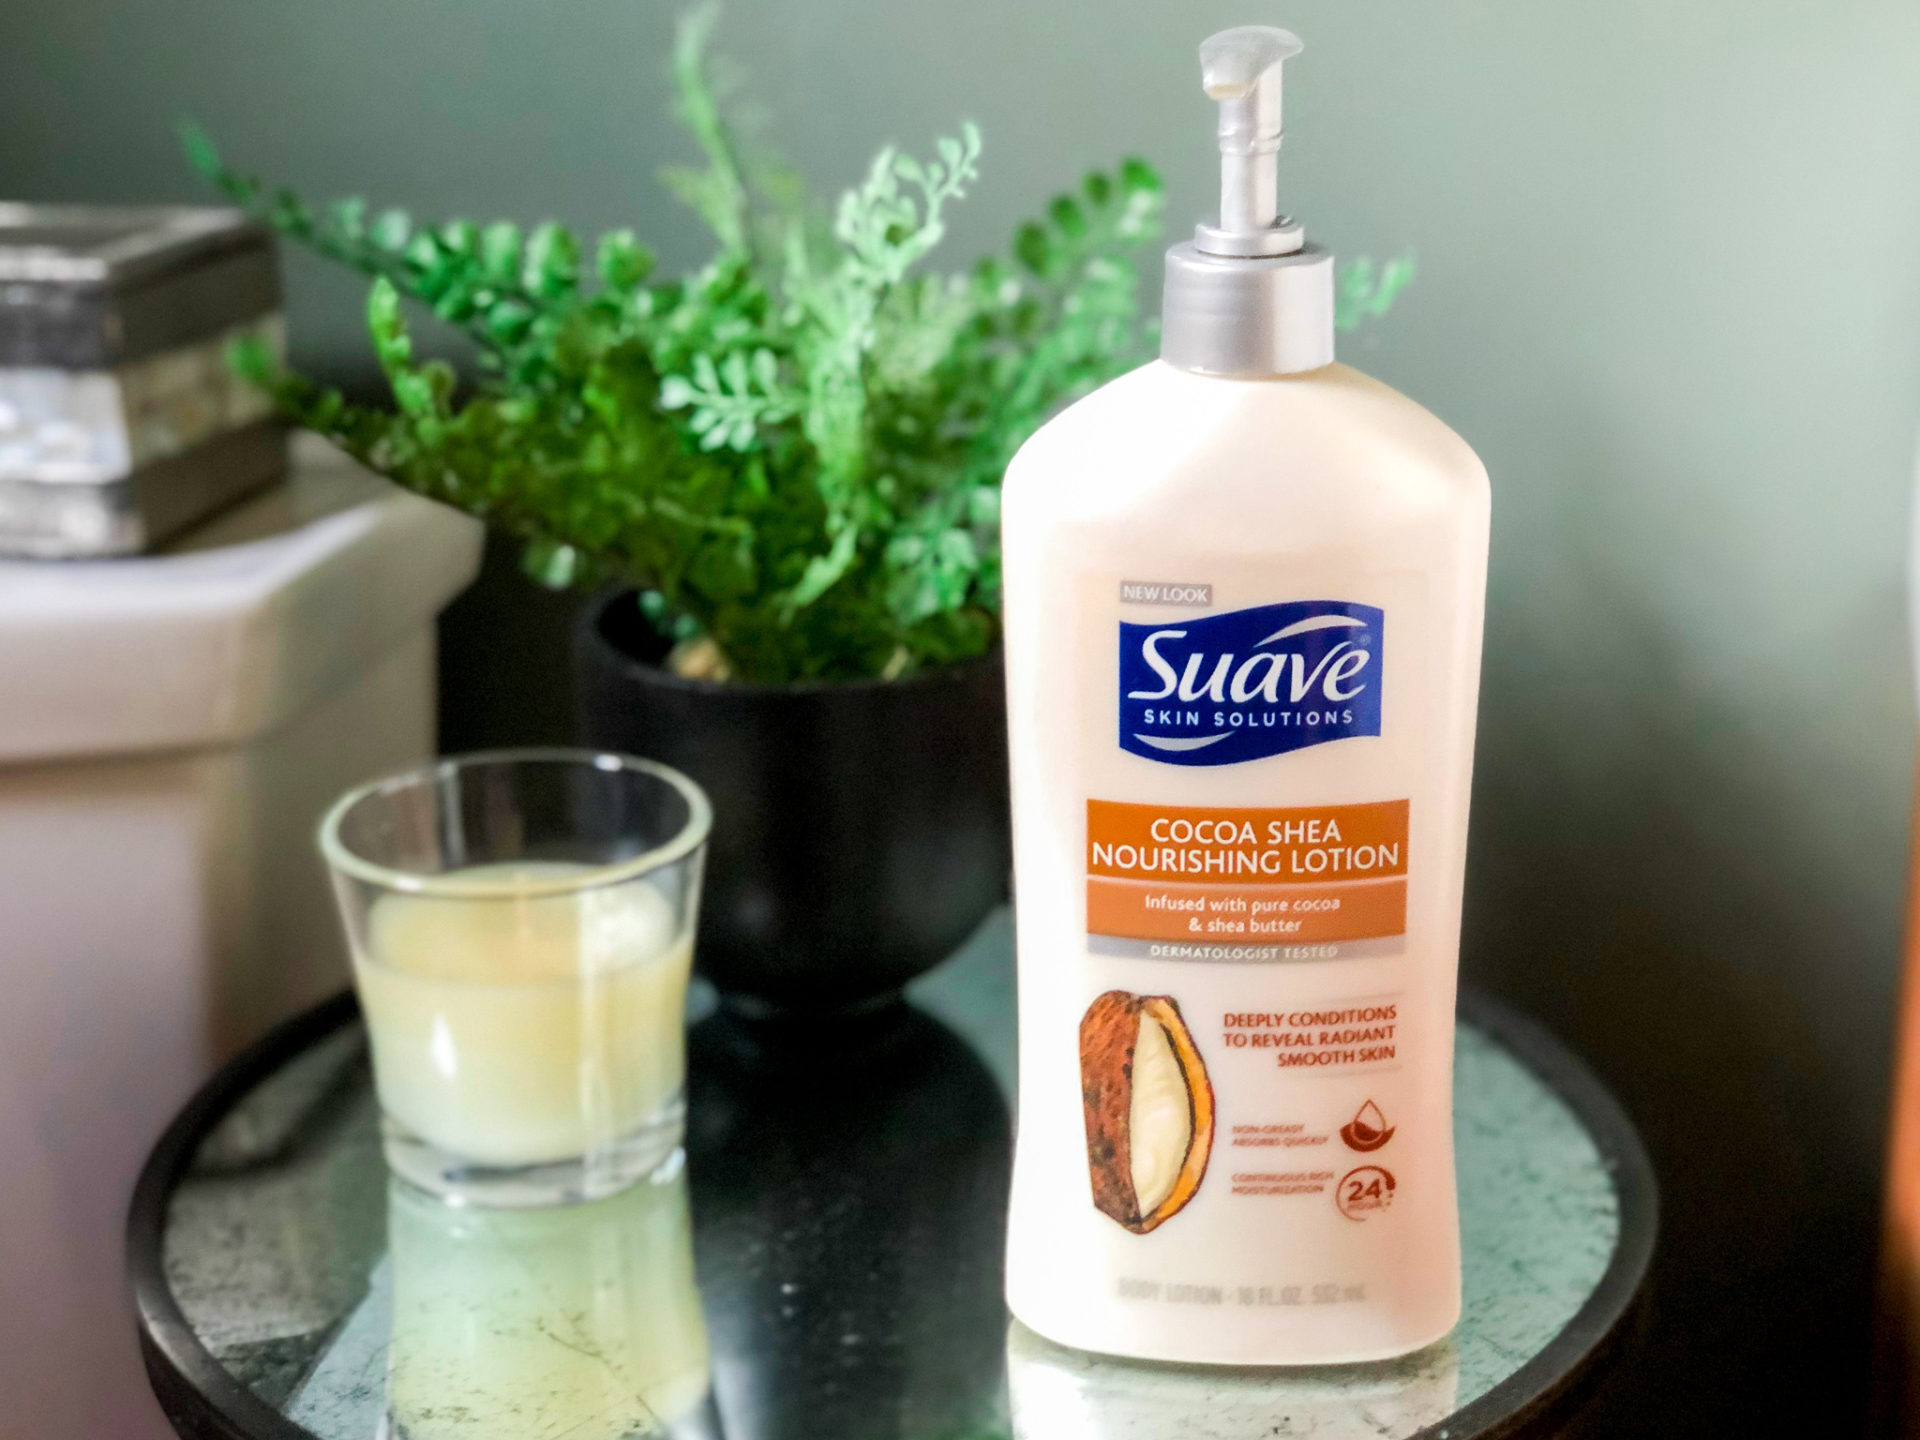 Suave Lotion Is Just $2.99 At Kroger (Regular Price $4.49)